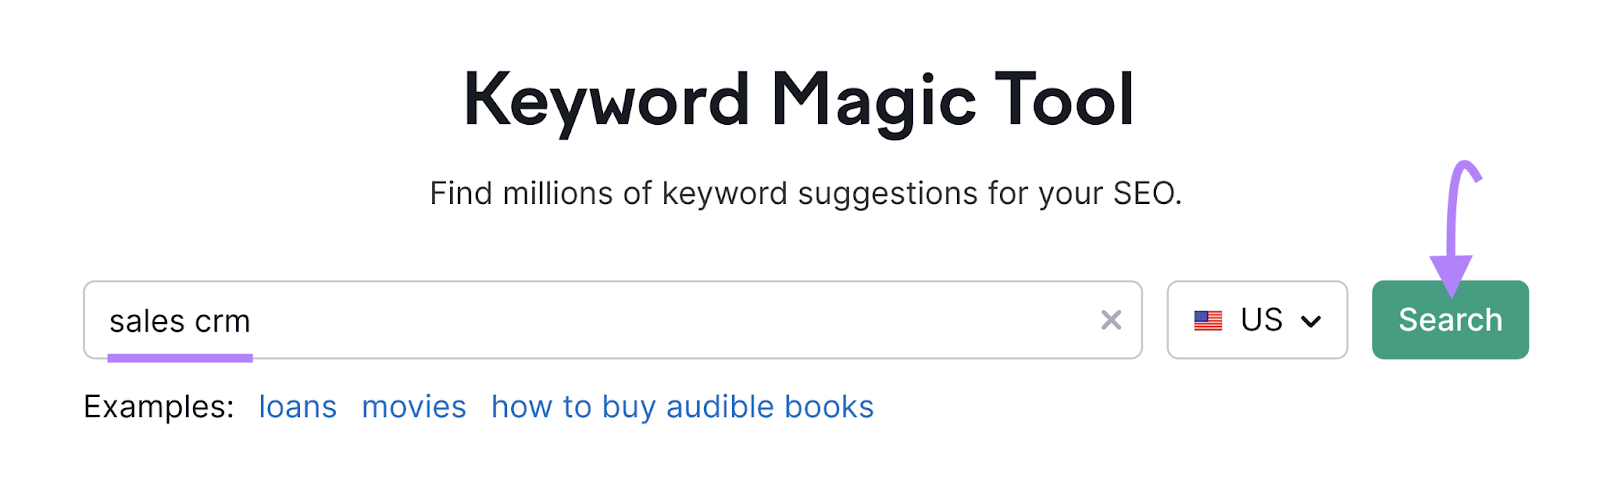 "sales crm" entered into the Keyword Magic Tool search bar